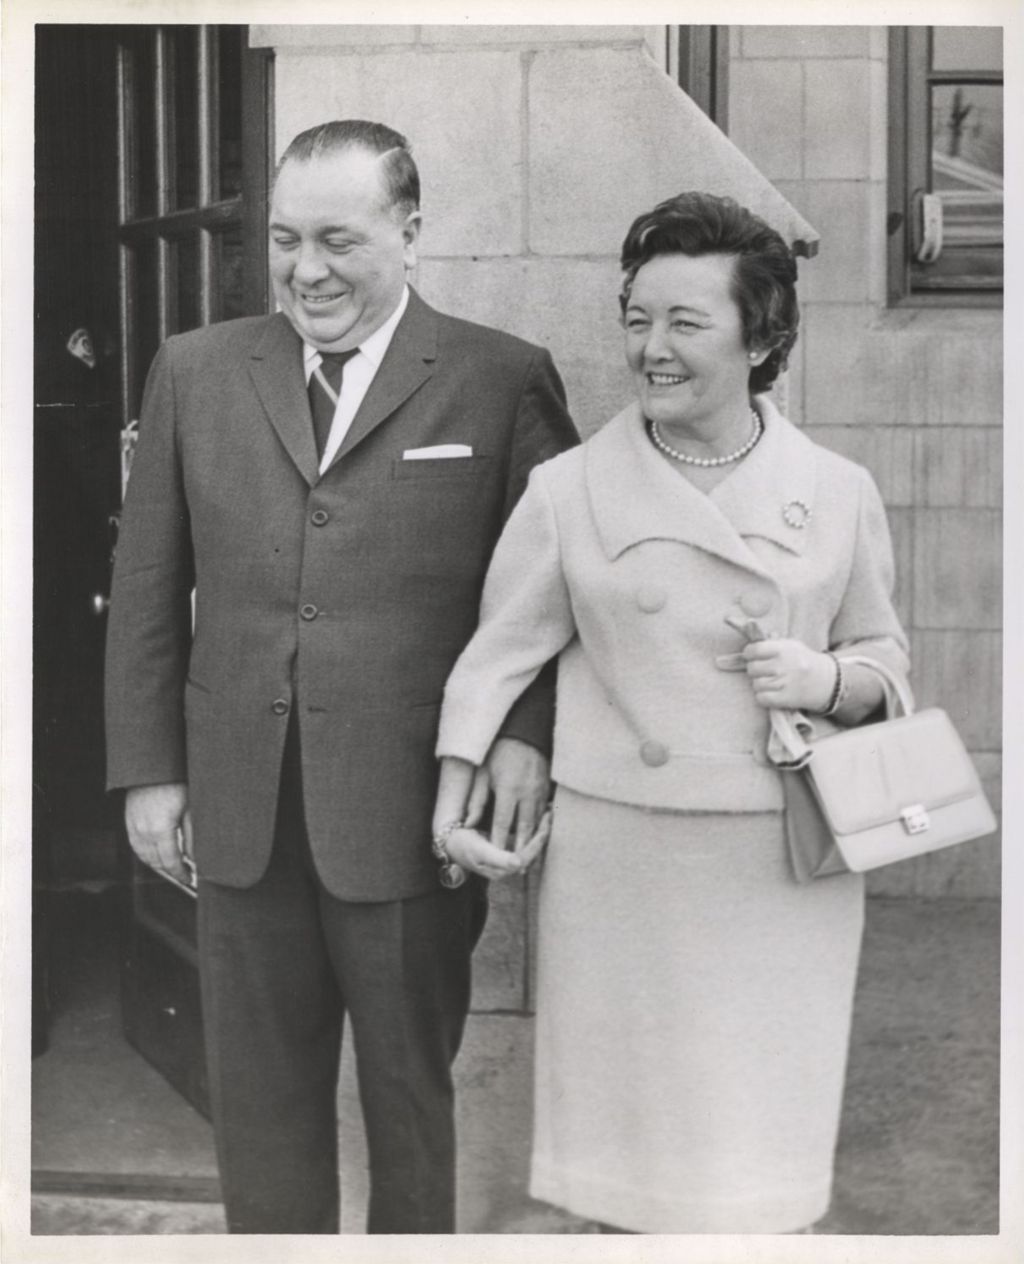 Richard J. and Eleanor Daley on voting day